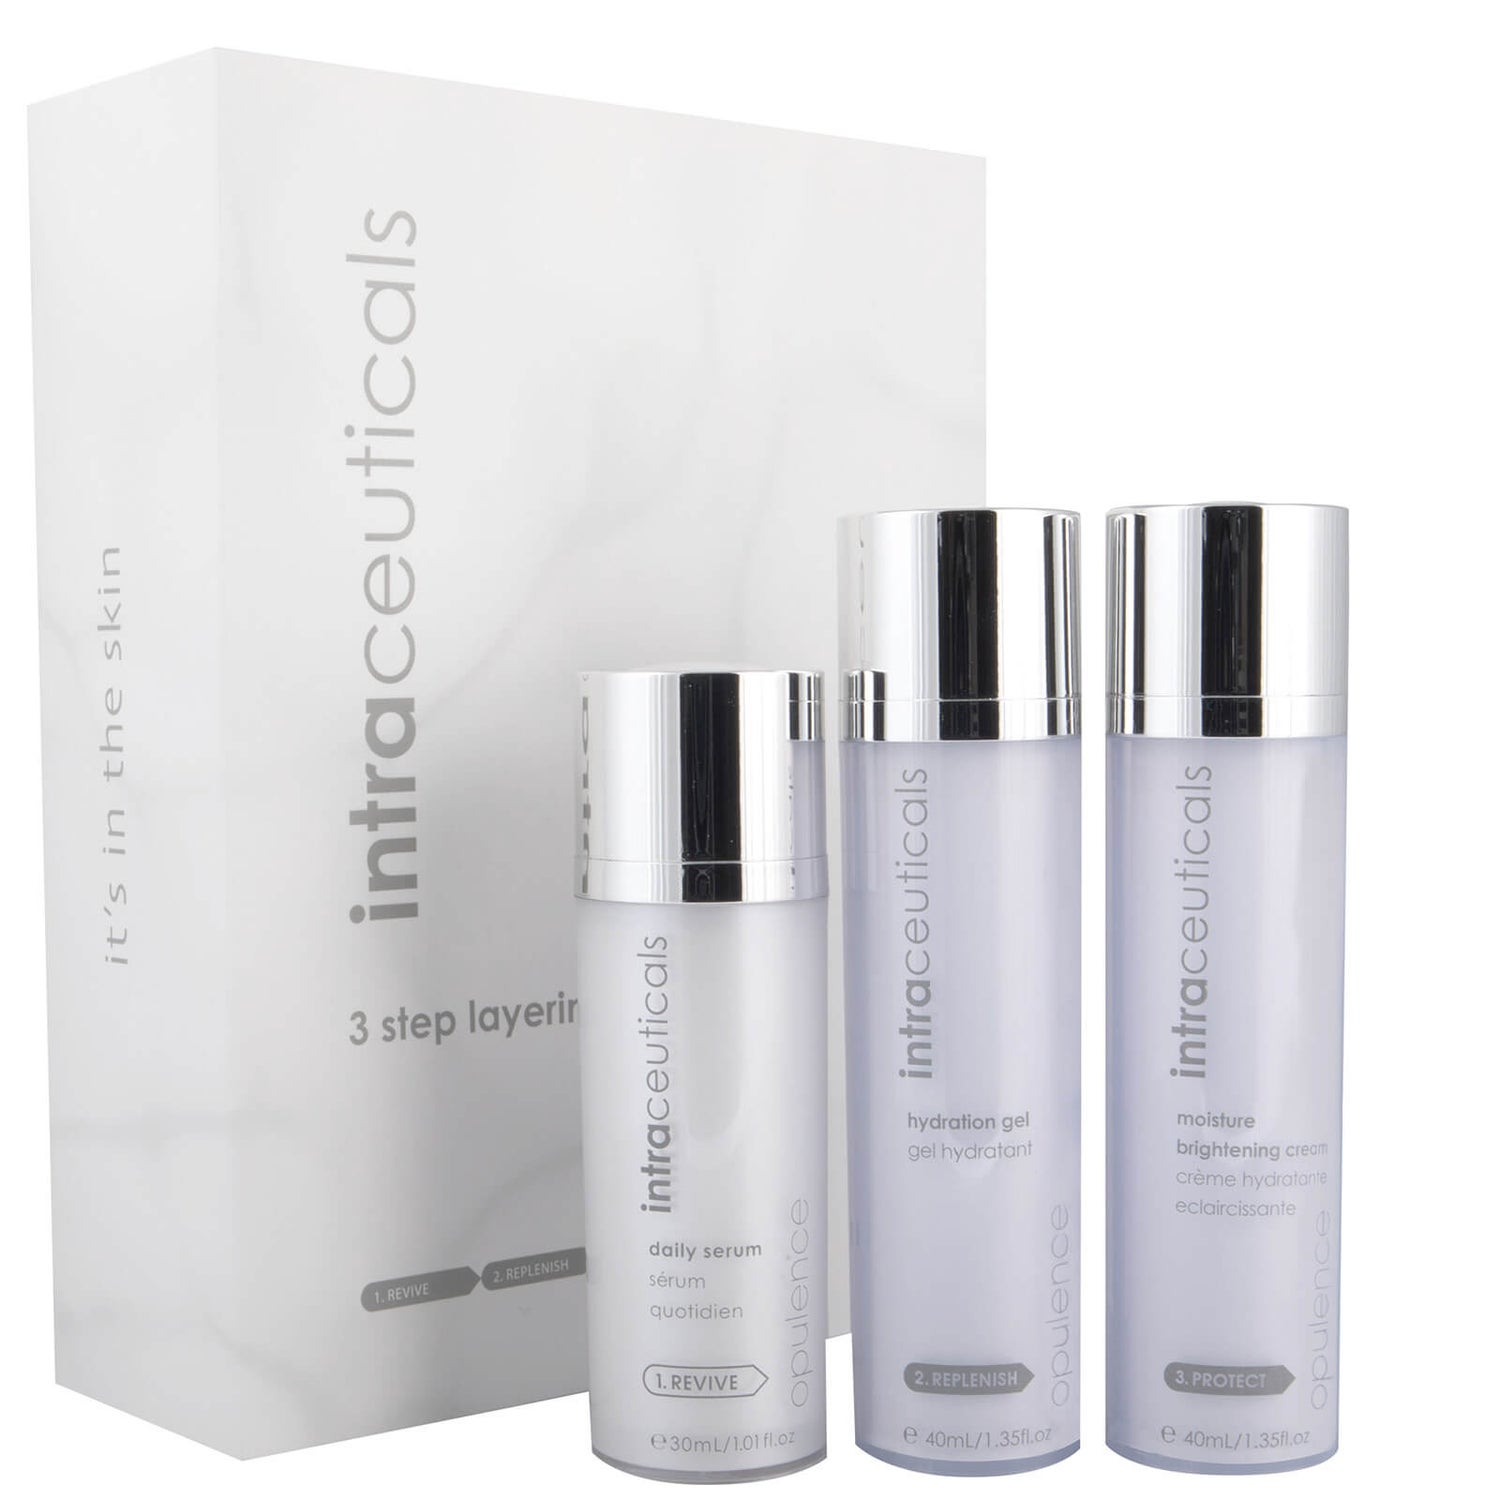 Intraceuticals Opulence 3 Step Layering Set 3.71 fl.oz